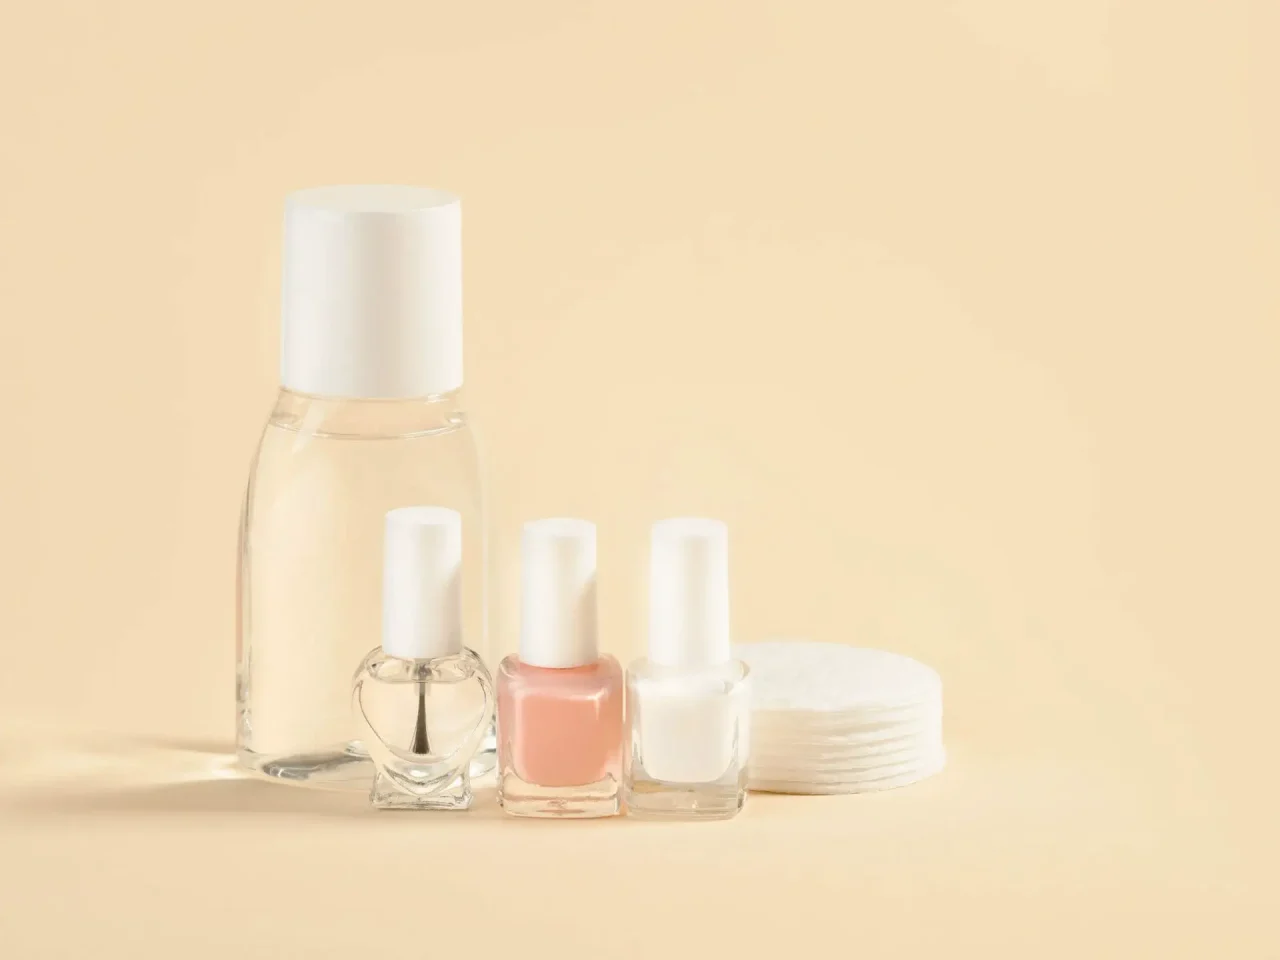 How to use baby oil to dry nail polish?